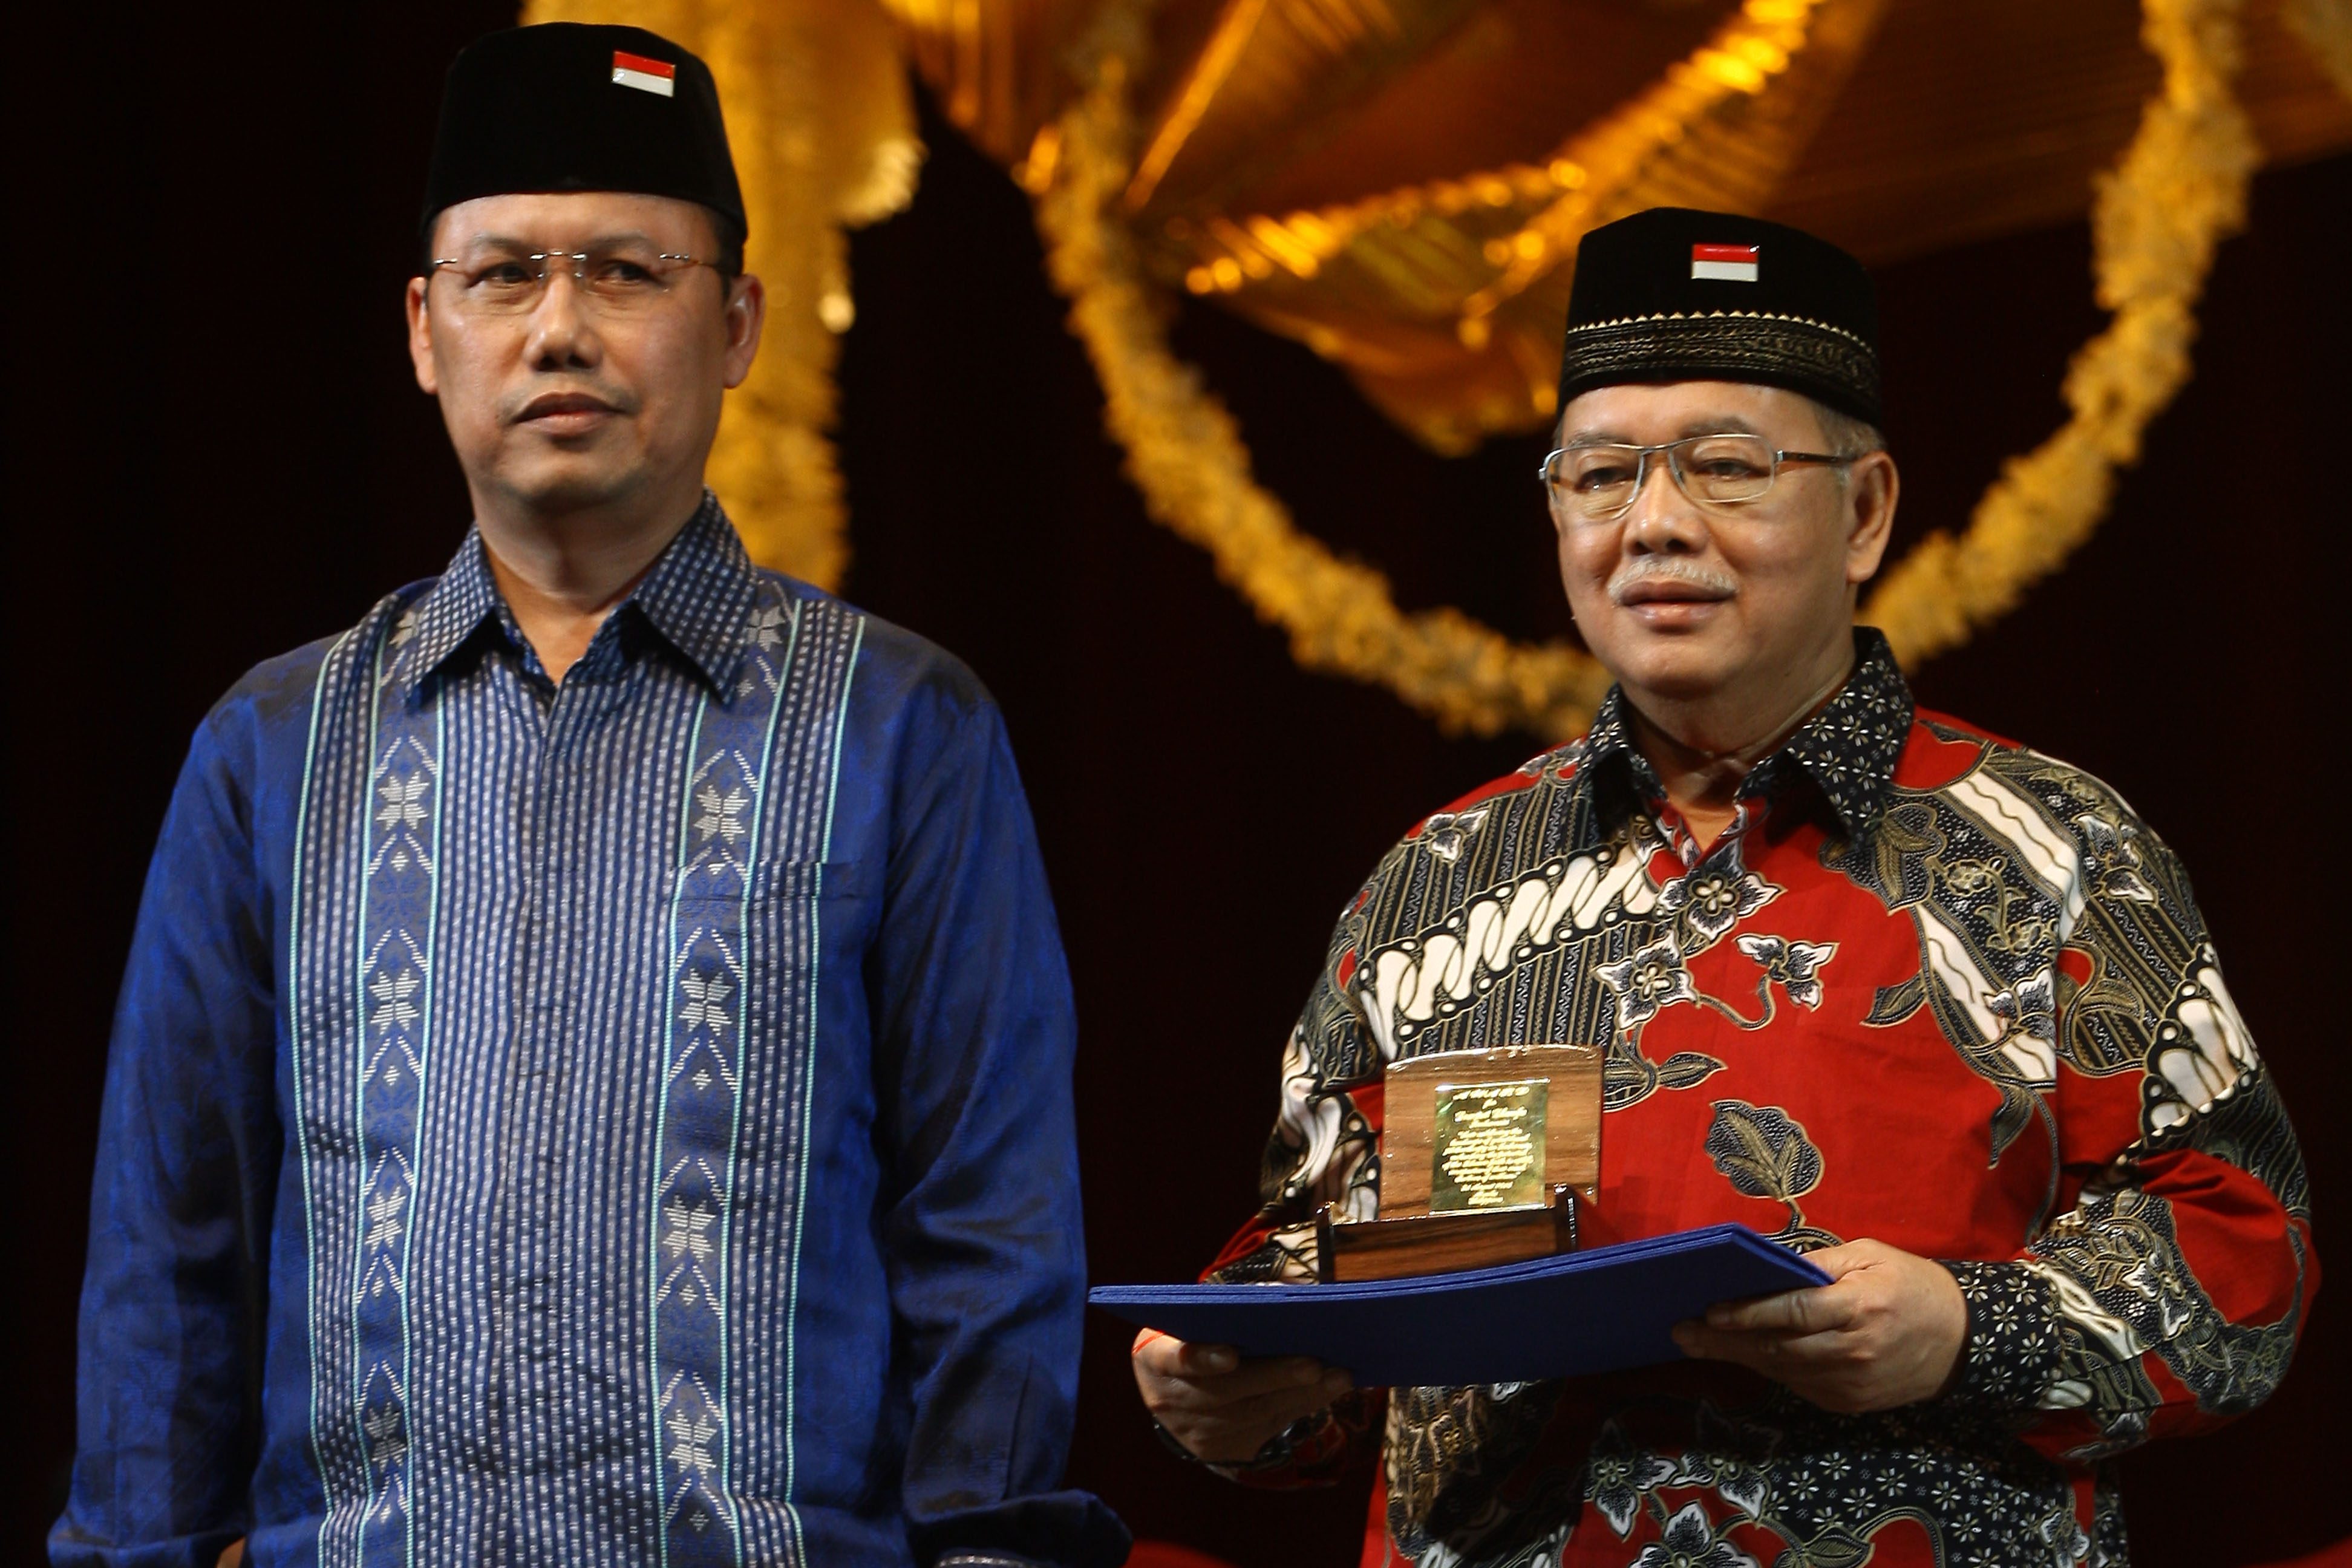 Representatives of Dompet Dhuafa (L-R) Ahmad Juwaini and Ismail Agus Said of Indonesia. Photo by Ben Nabong/ Rappler 